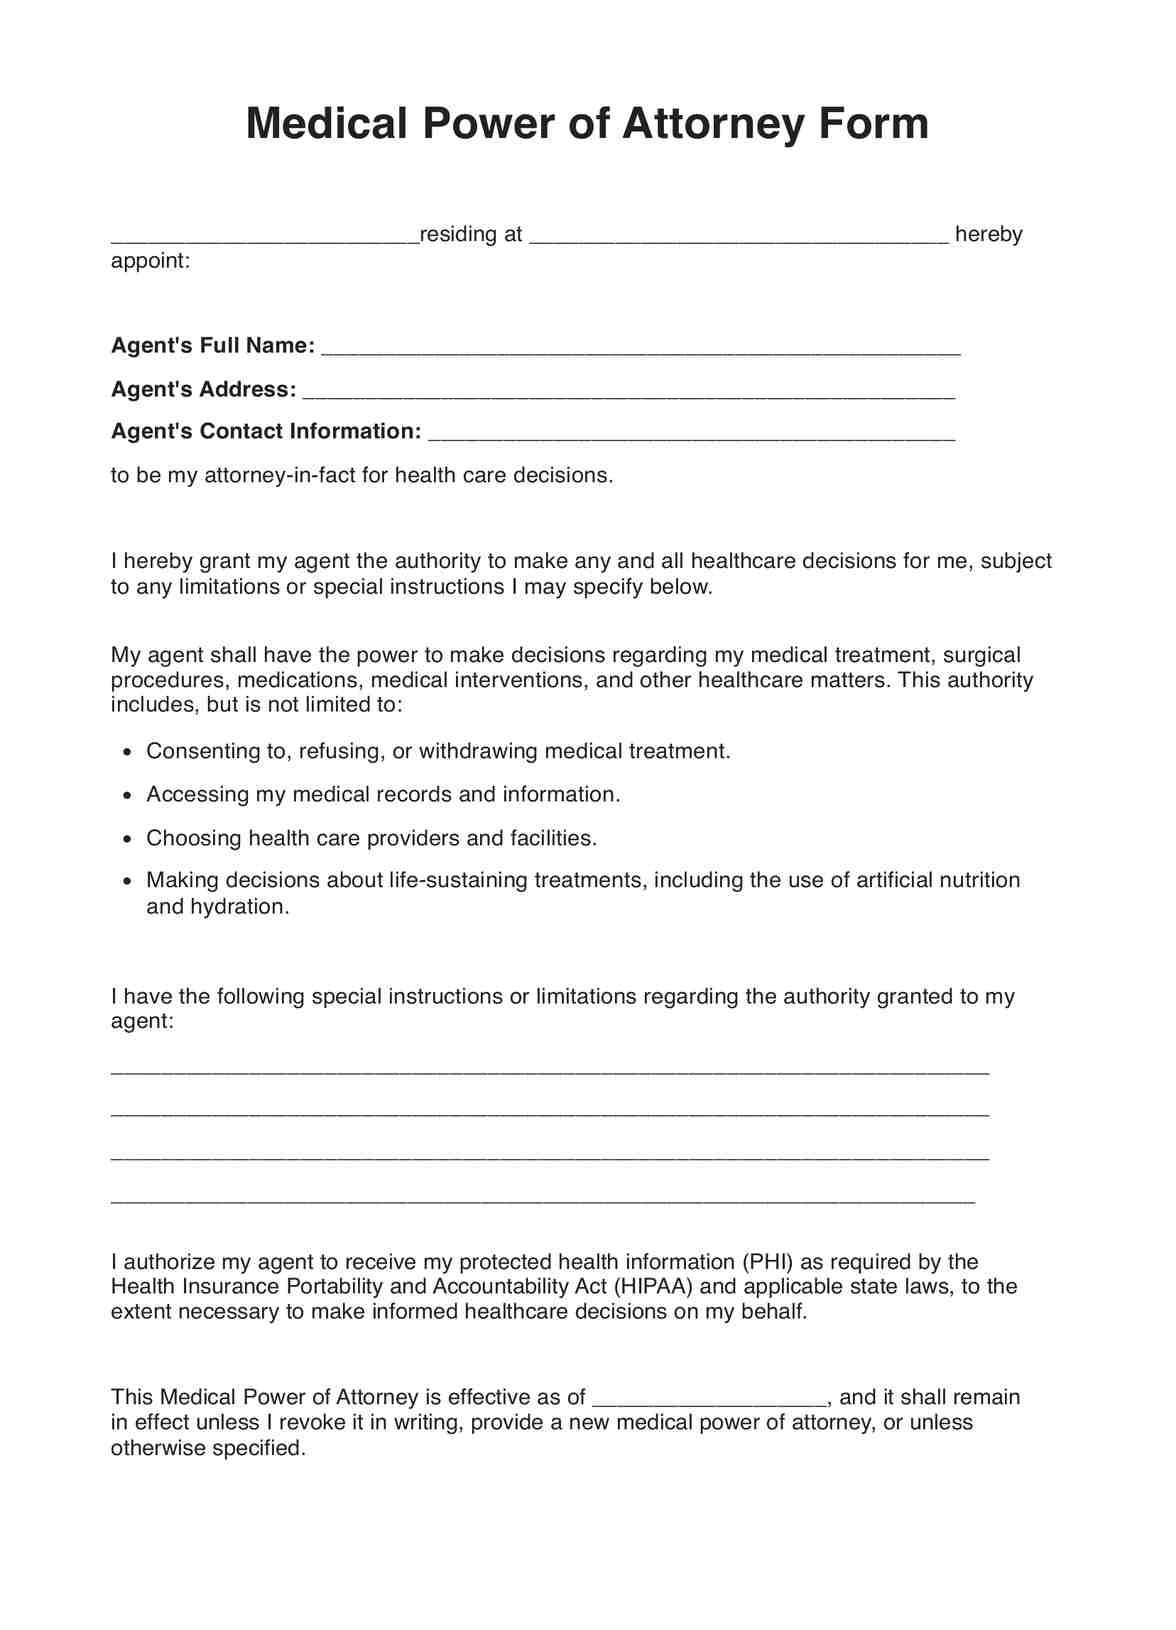 Medical Power of Attorney Illinois Form PDF Example